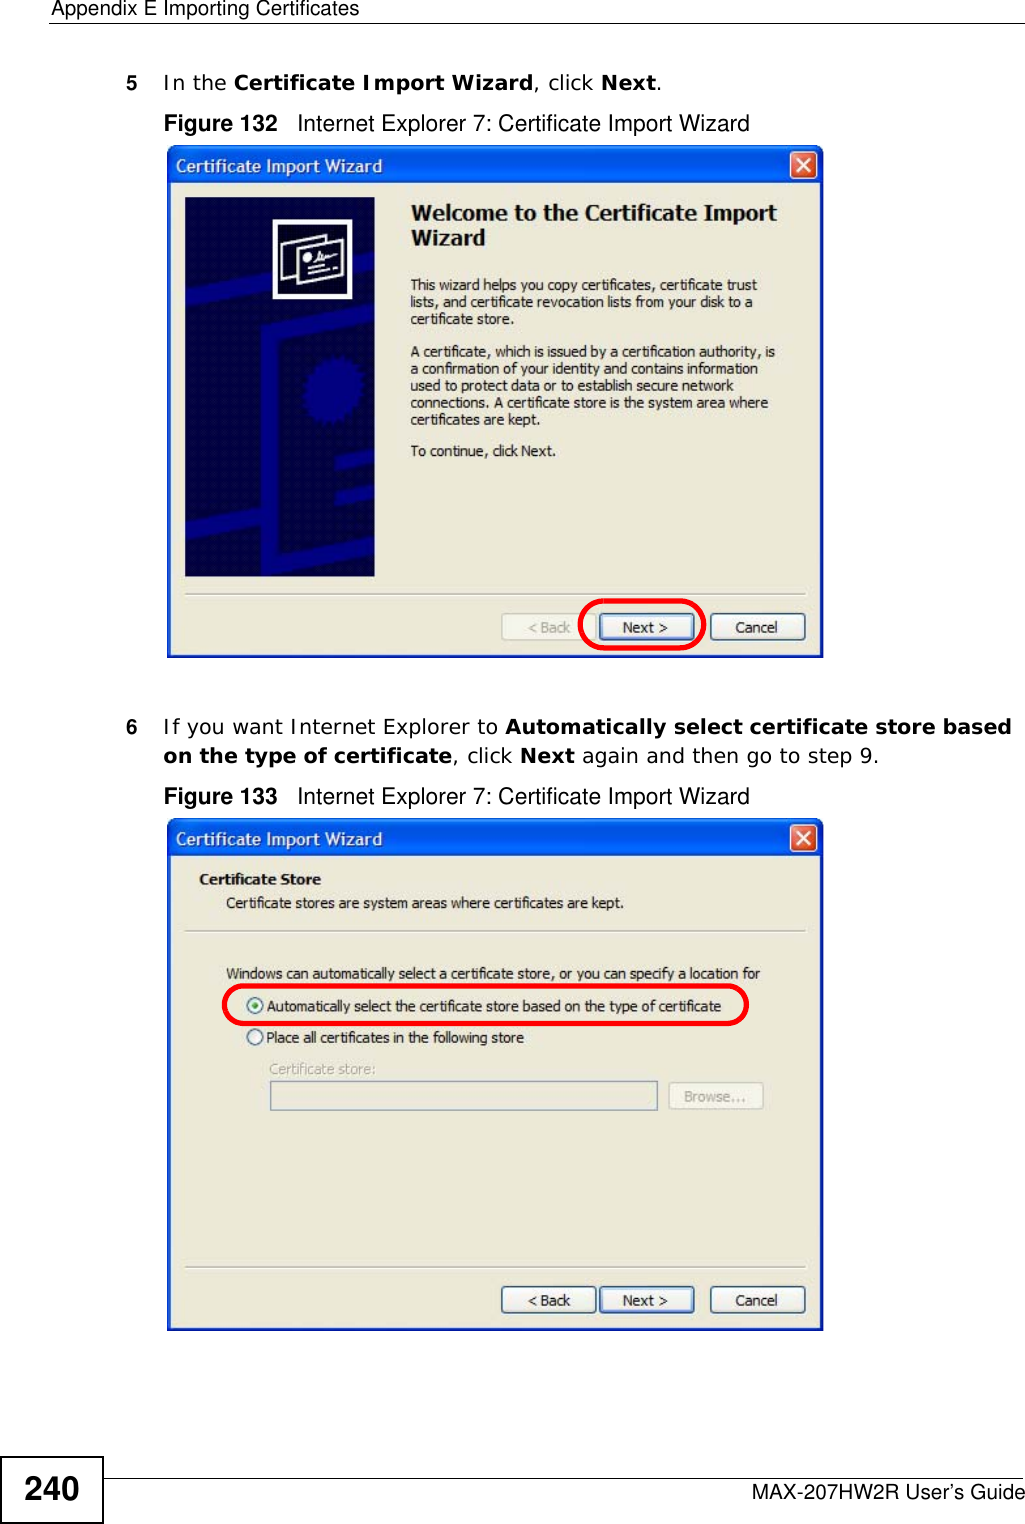 Appendix E Importing CertificatesMAX-207HW2R User’s Guide2405In the Certificate Import Wizard, click Next.Figure 132   Internet Explorer 7: Certificate Import Wizard6If you want Internet Explorer to Automatically select certificate store based on the type of certificate, click Next again and then go to step 9.Figure 133   Internet Explorer 7: Certificate Import Wizard